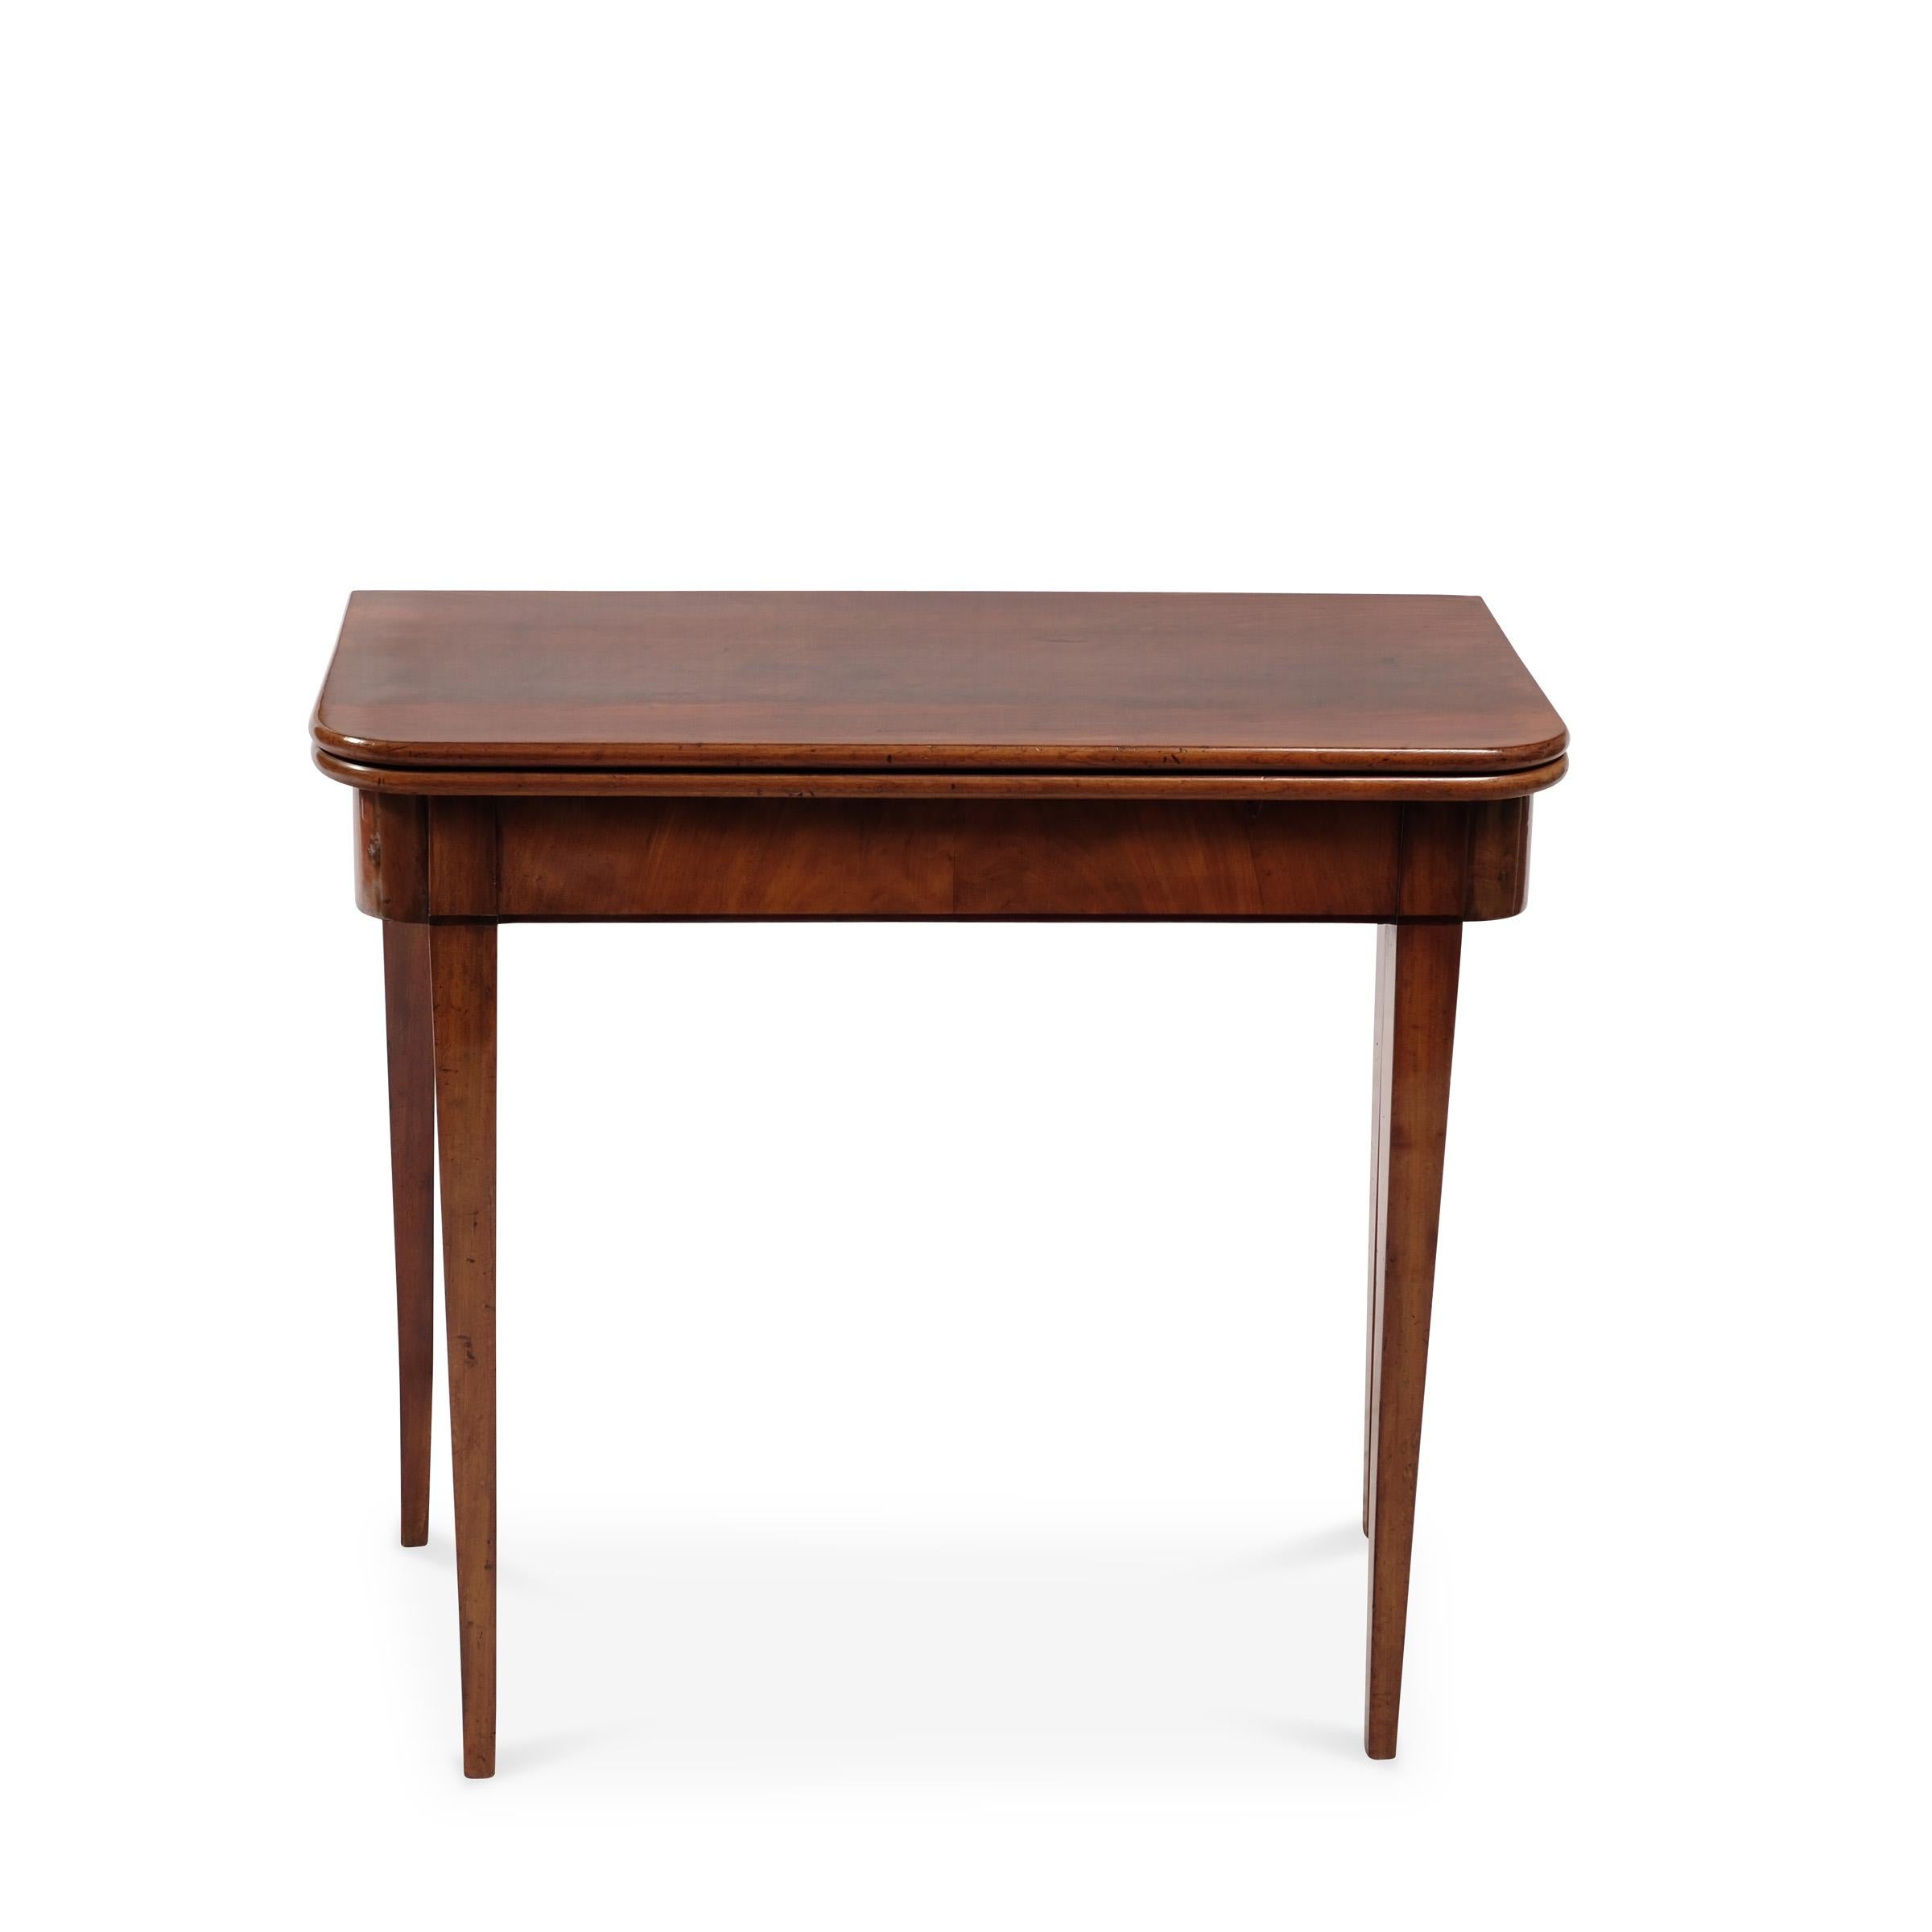 Folding console table Biedermeier around 1820/25

Mahogany veneered, top swivels and opens, rounded edges, restored condition,

shellac hand polish

 

Dimensions:

Height 78 cm - Width 85 cm - Depth 41,5 (93,5 cm)